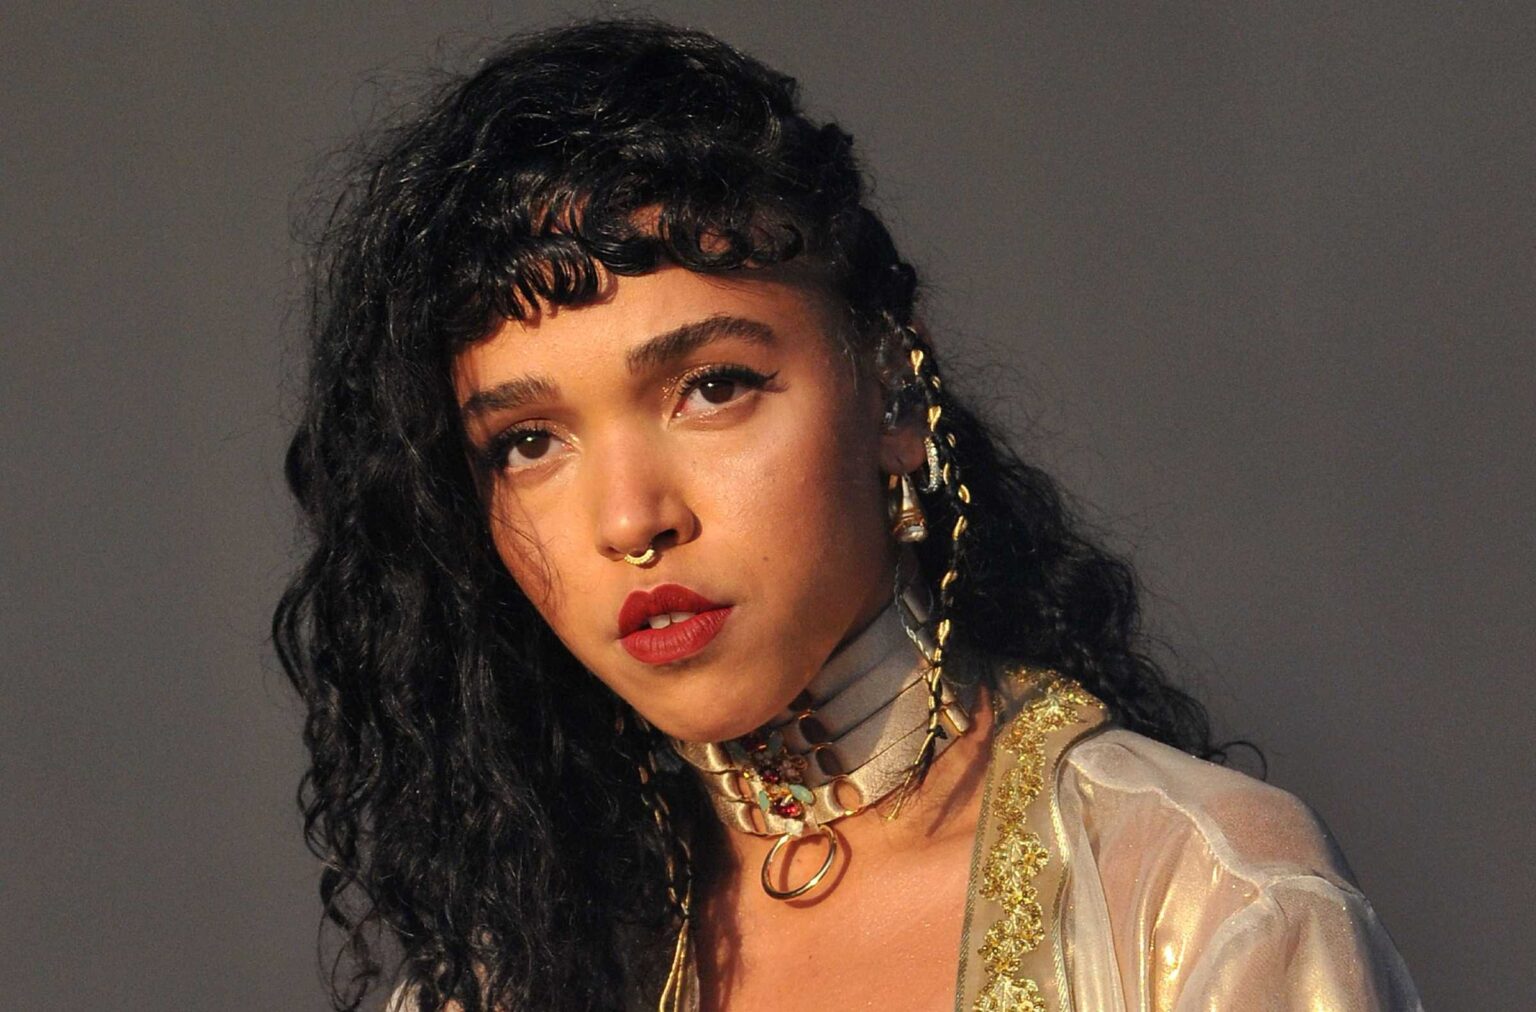 Shia LeBeouf's former girlfriend FKA Twigs speaks out about her domestic abuse ordeal. Has COVID-19 made it worse for abuse victims?